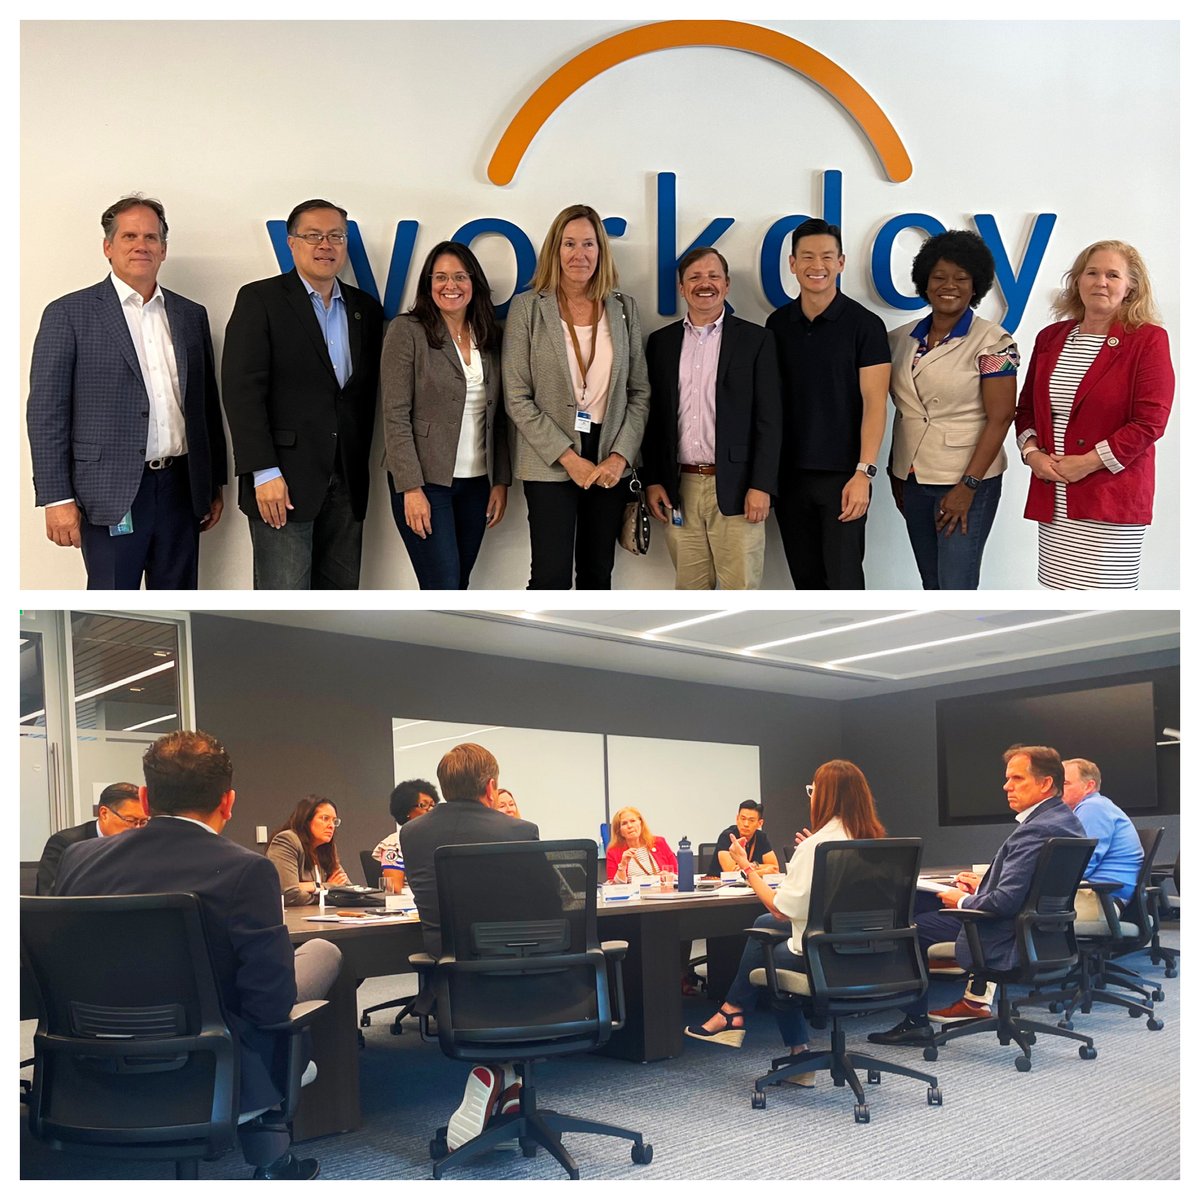 We were delighted to host the @CATechCaucus at our Pleasanton HQ last week for a discussion on the importance of #AI in advancing a #skills-based approach to workforce development, as well as our leadership in developing AI regulatory safeguards in Sacramento and beyond.